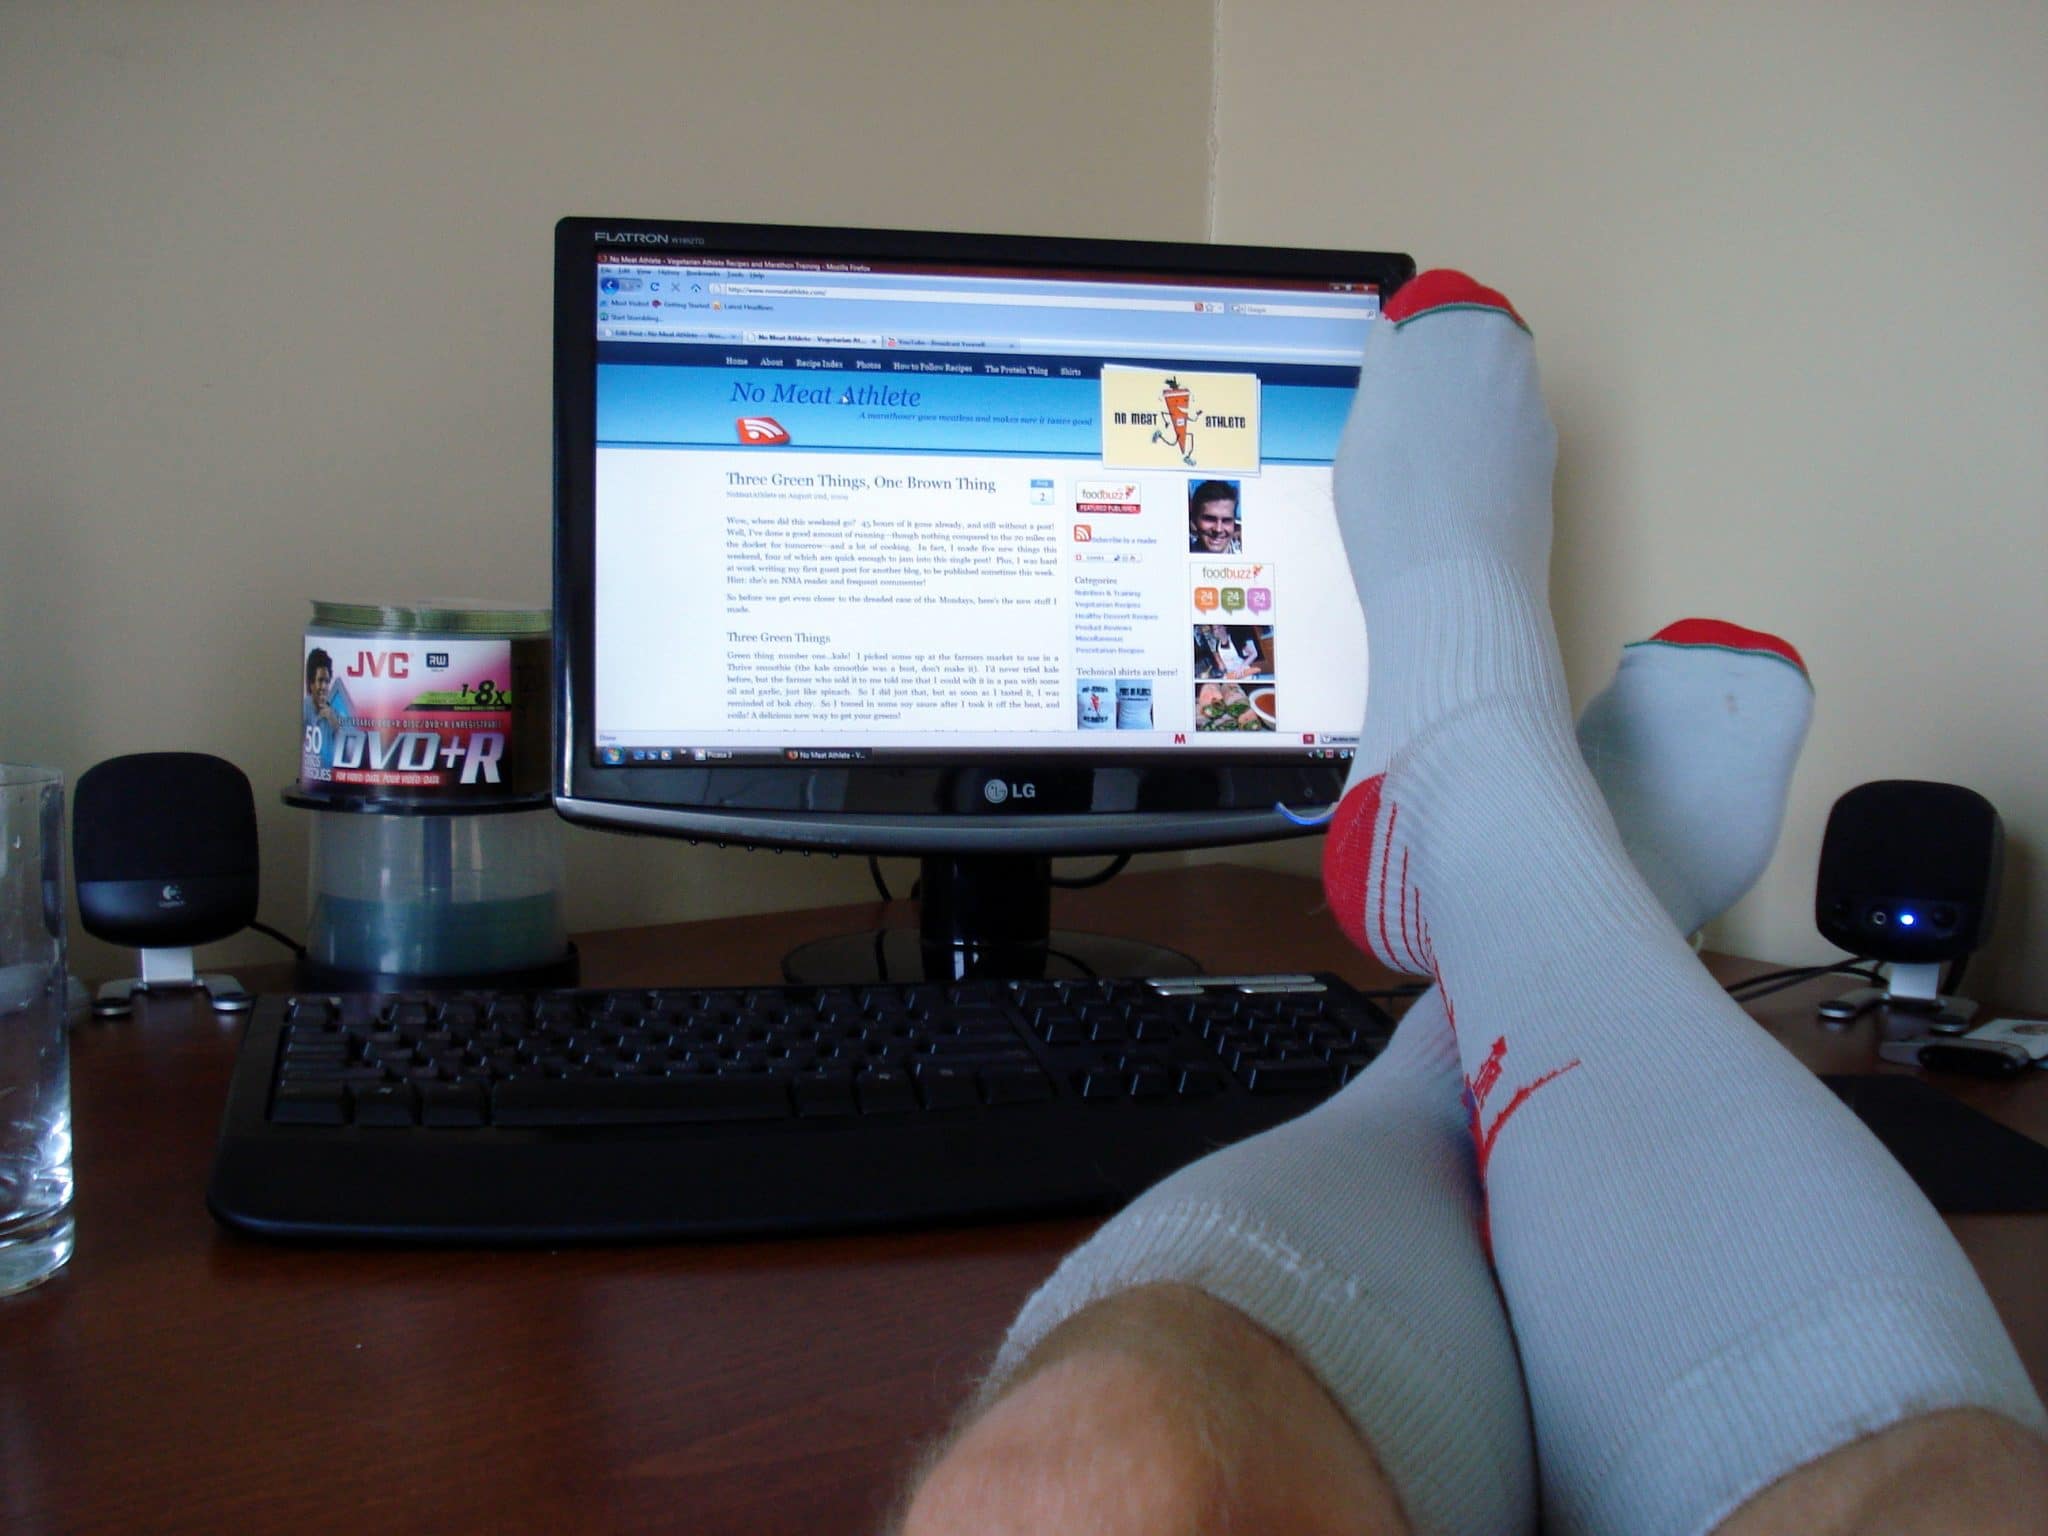 Matt wearing The Recovery Socks while propping feet up on desk in front of computer